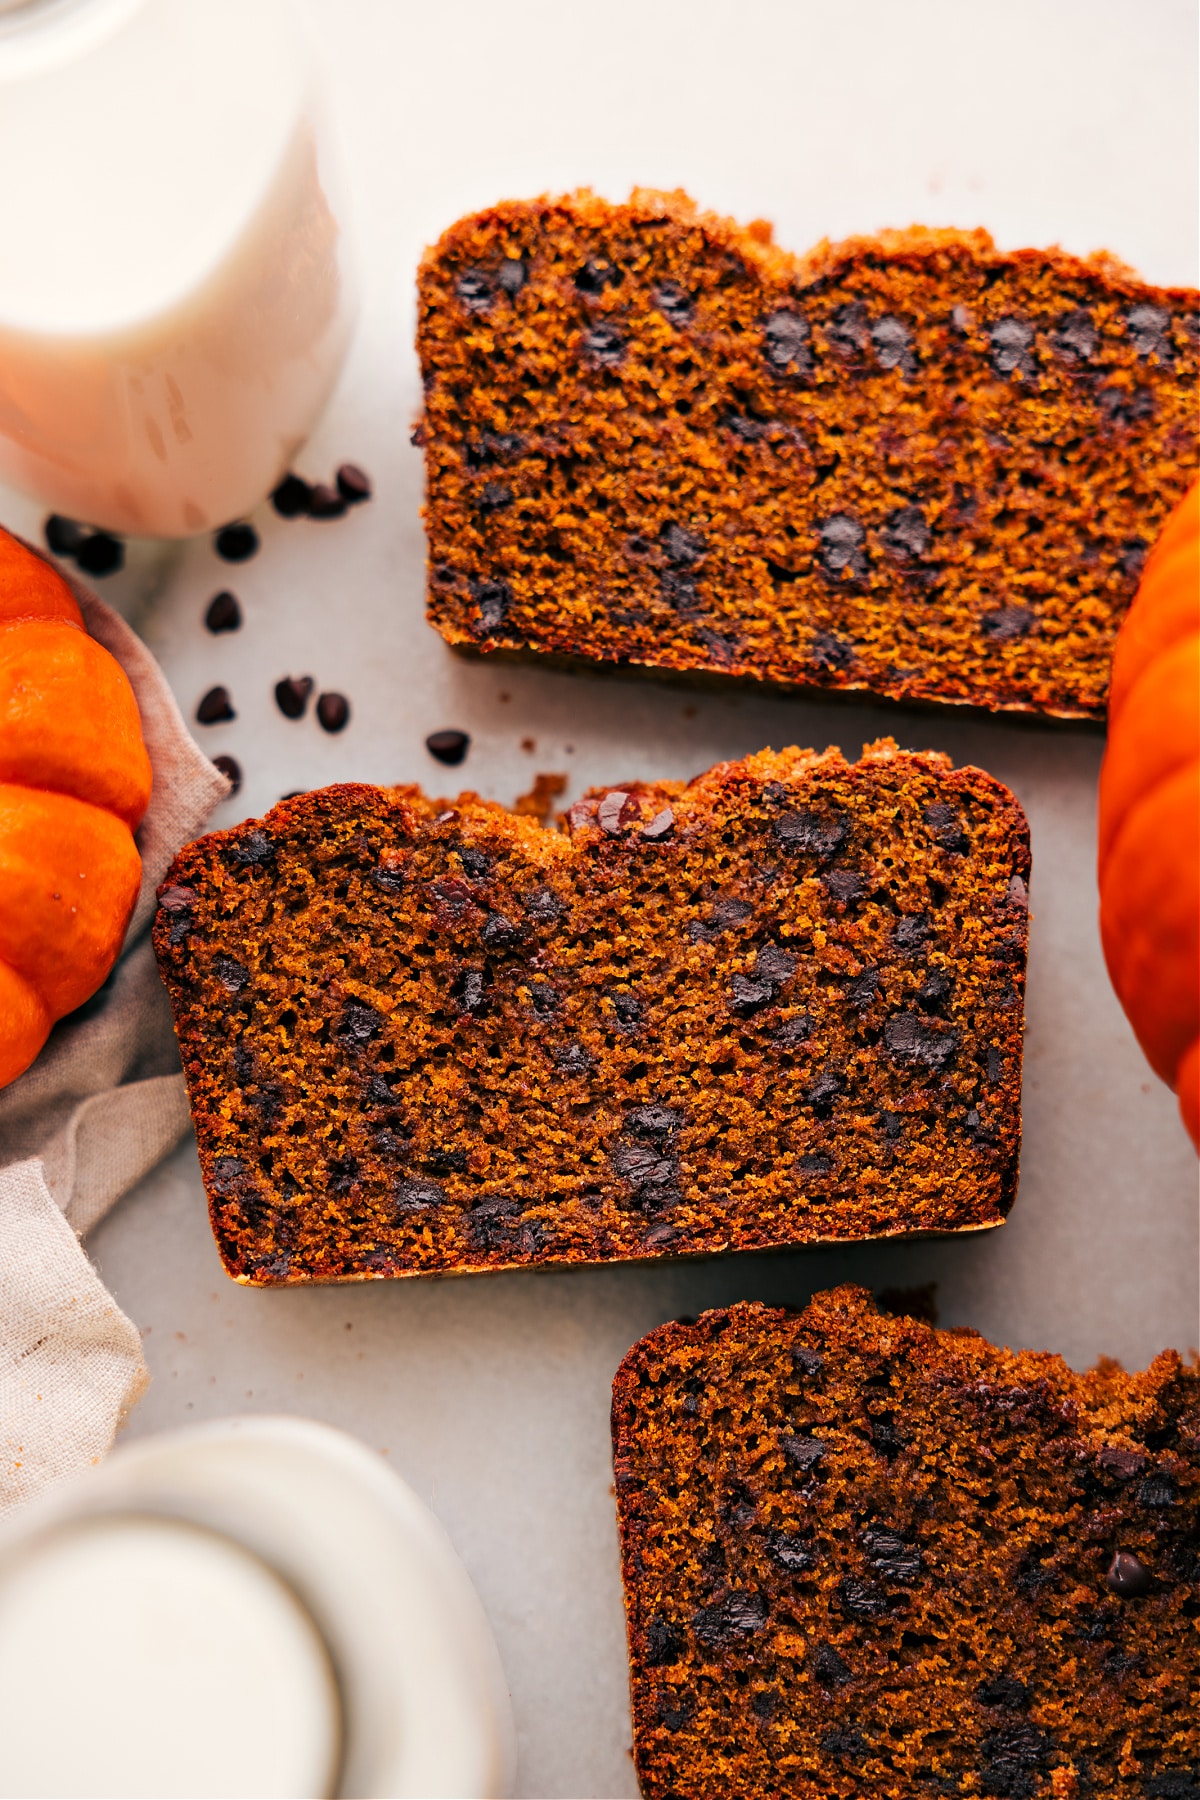 Three slices of chocolate chip pumpkin bread showcasing their delicious interior with scattered chocolate chips.